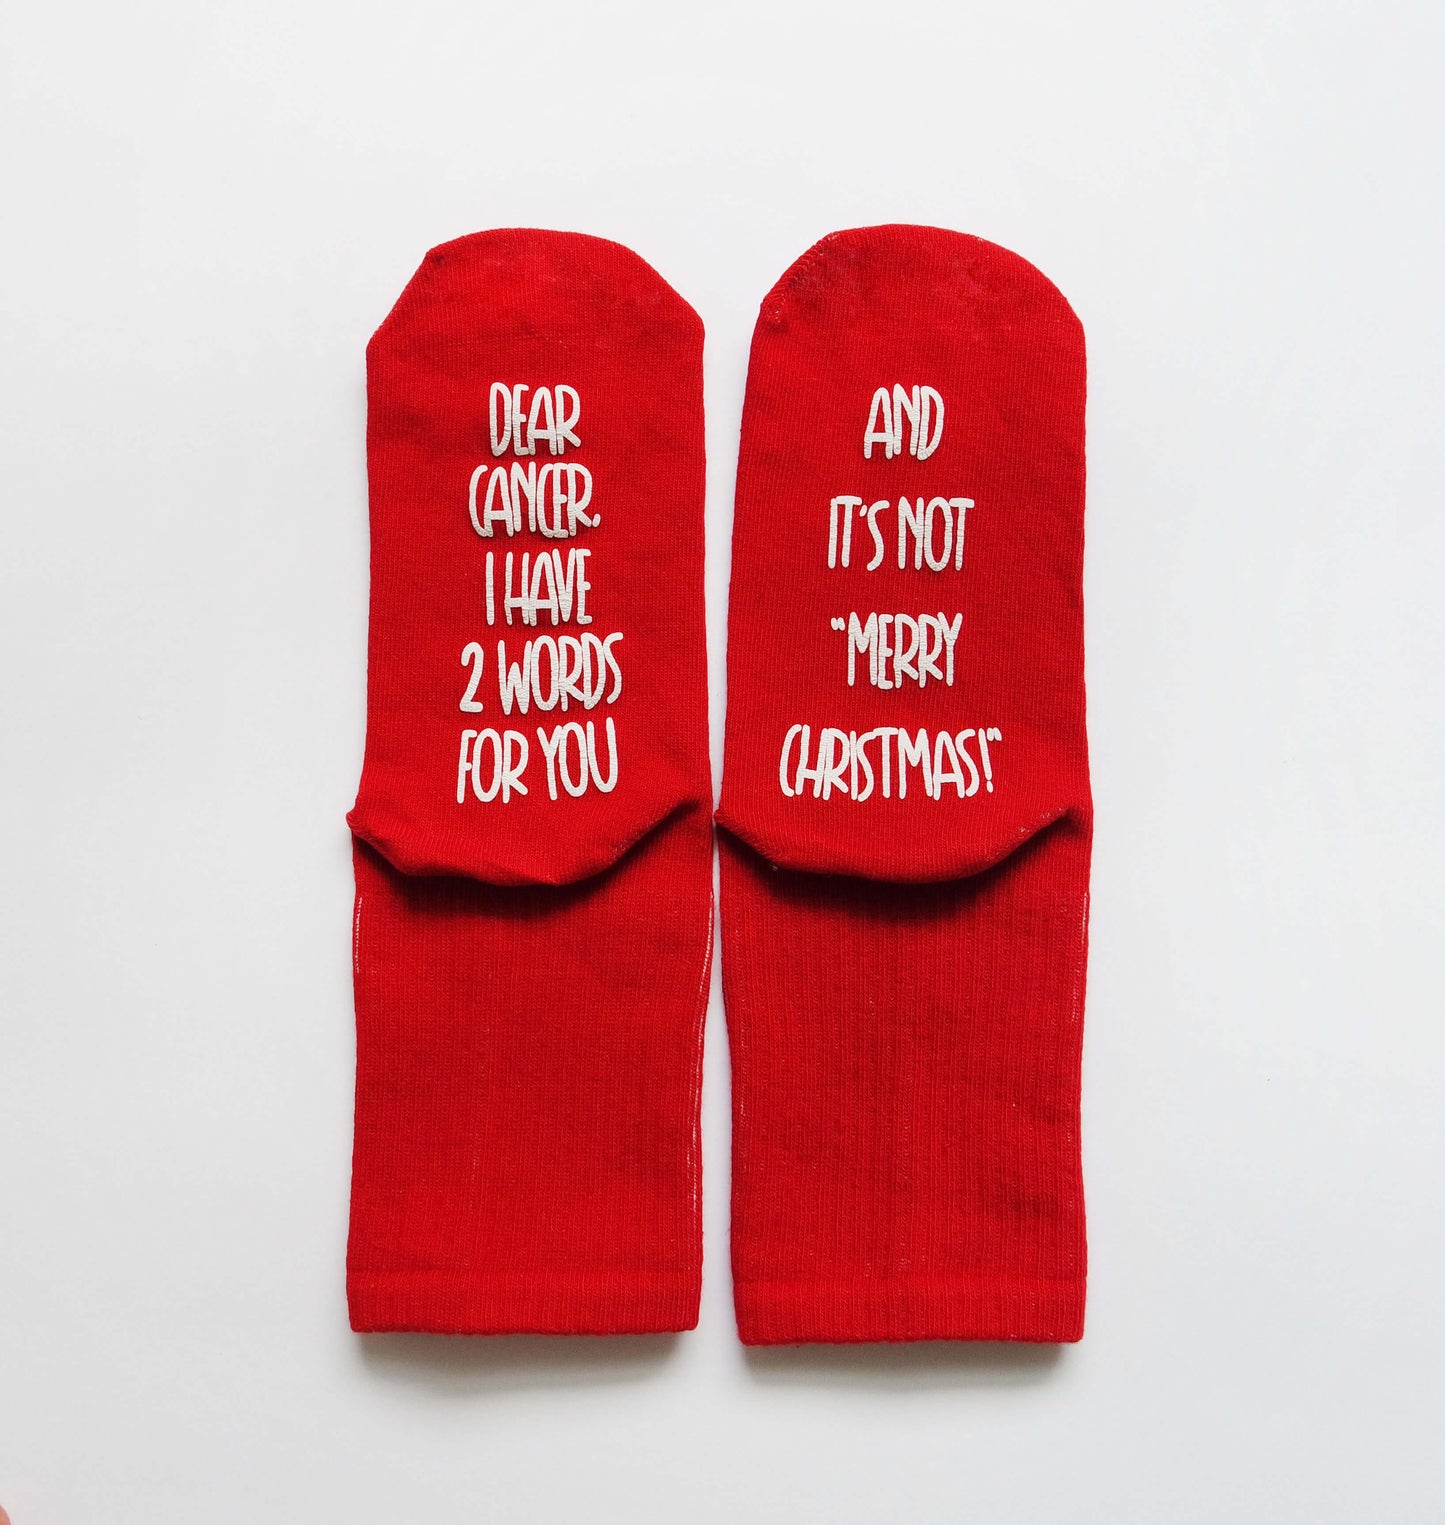 Red Christmas Socks with a resolute message for women, challenging cancer and embodying unwavering determination.